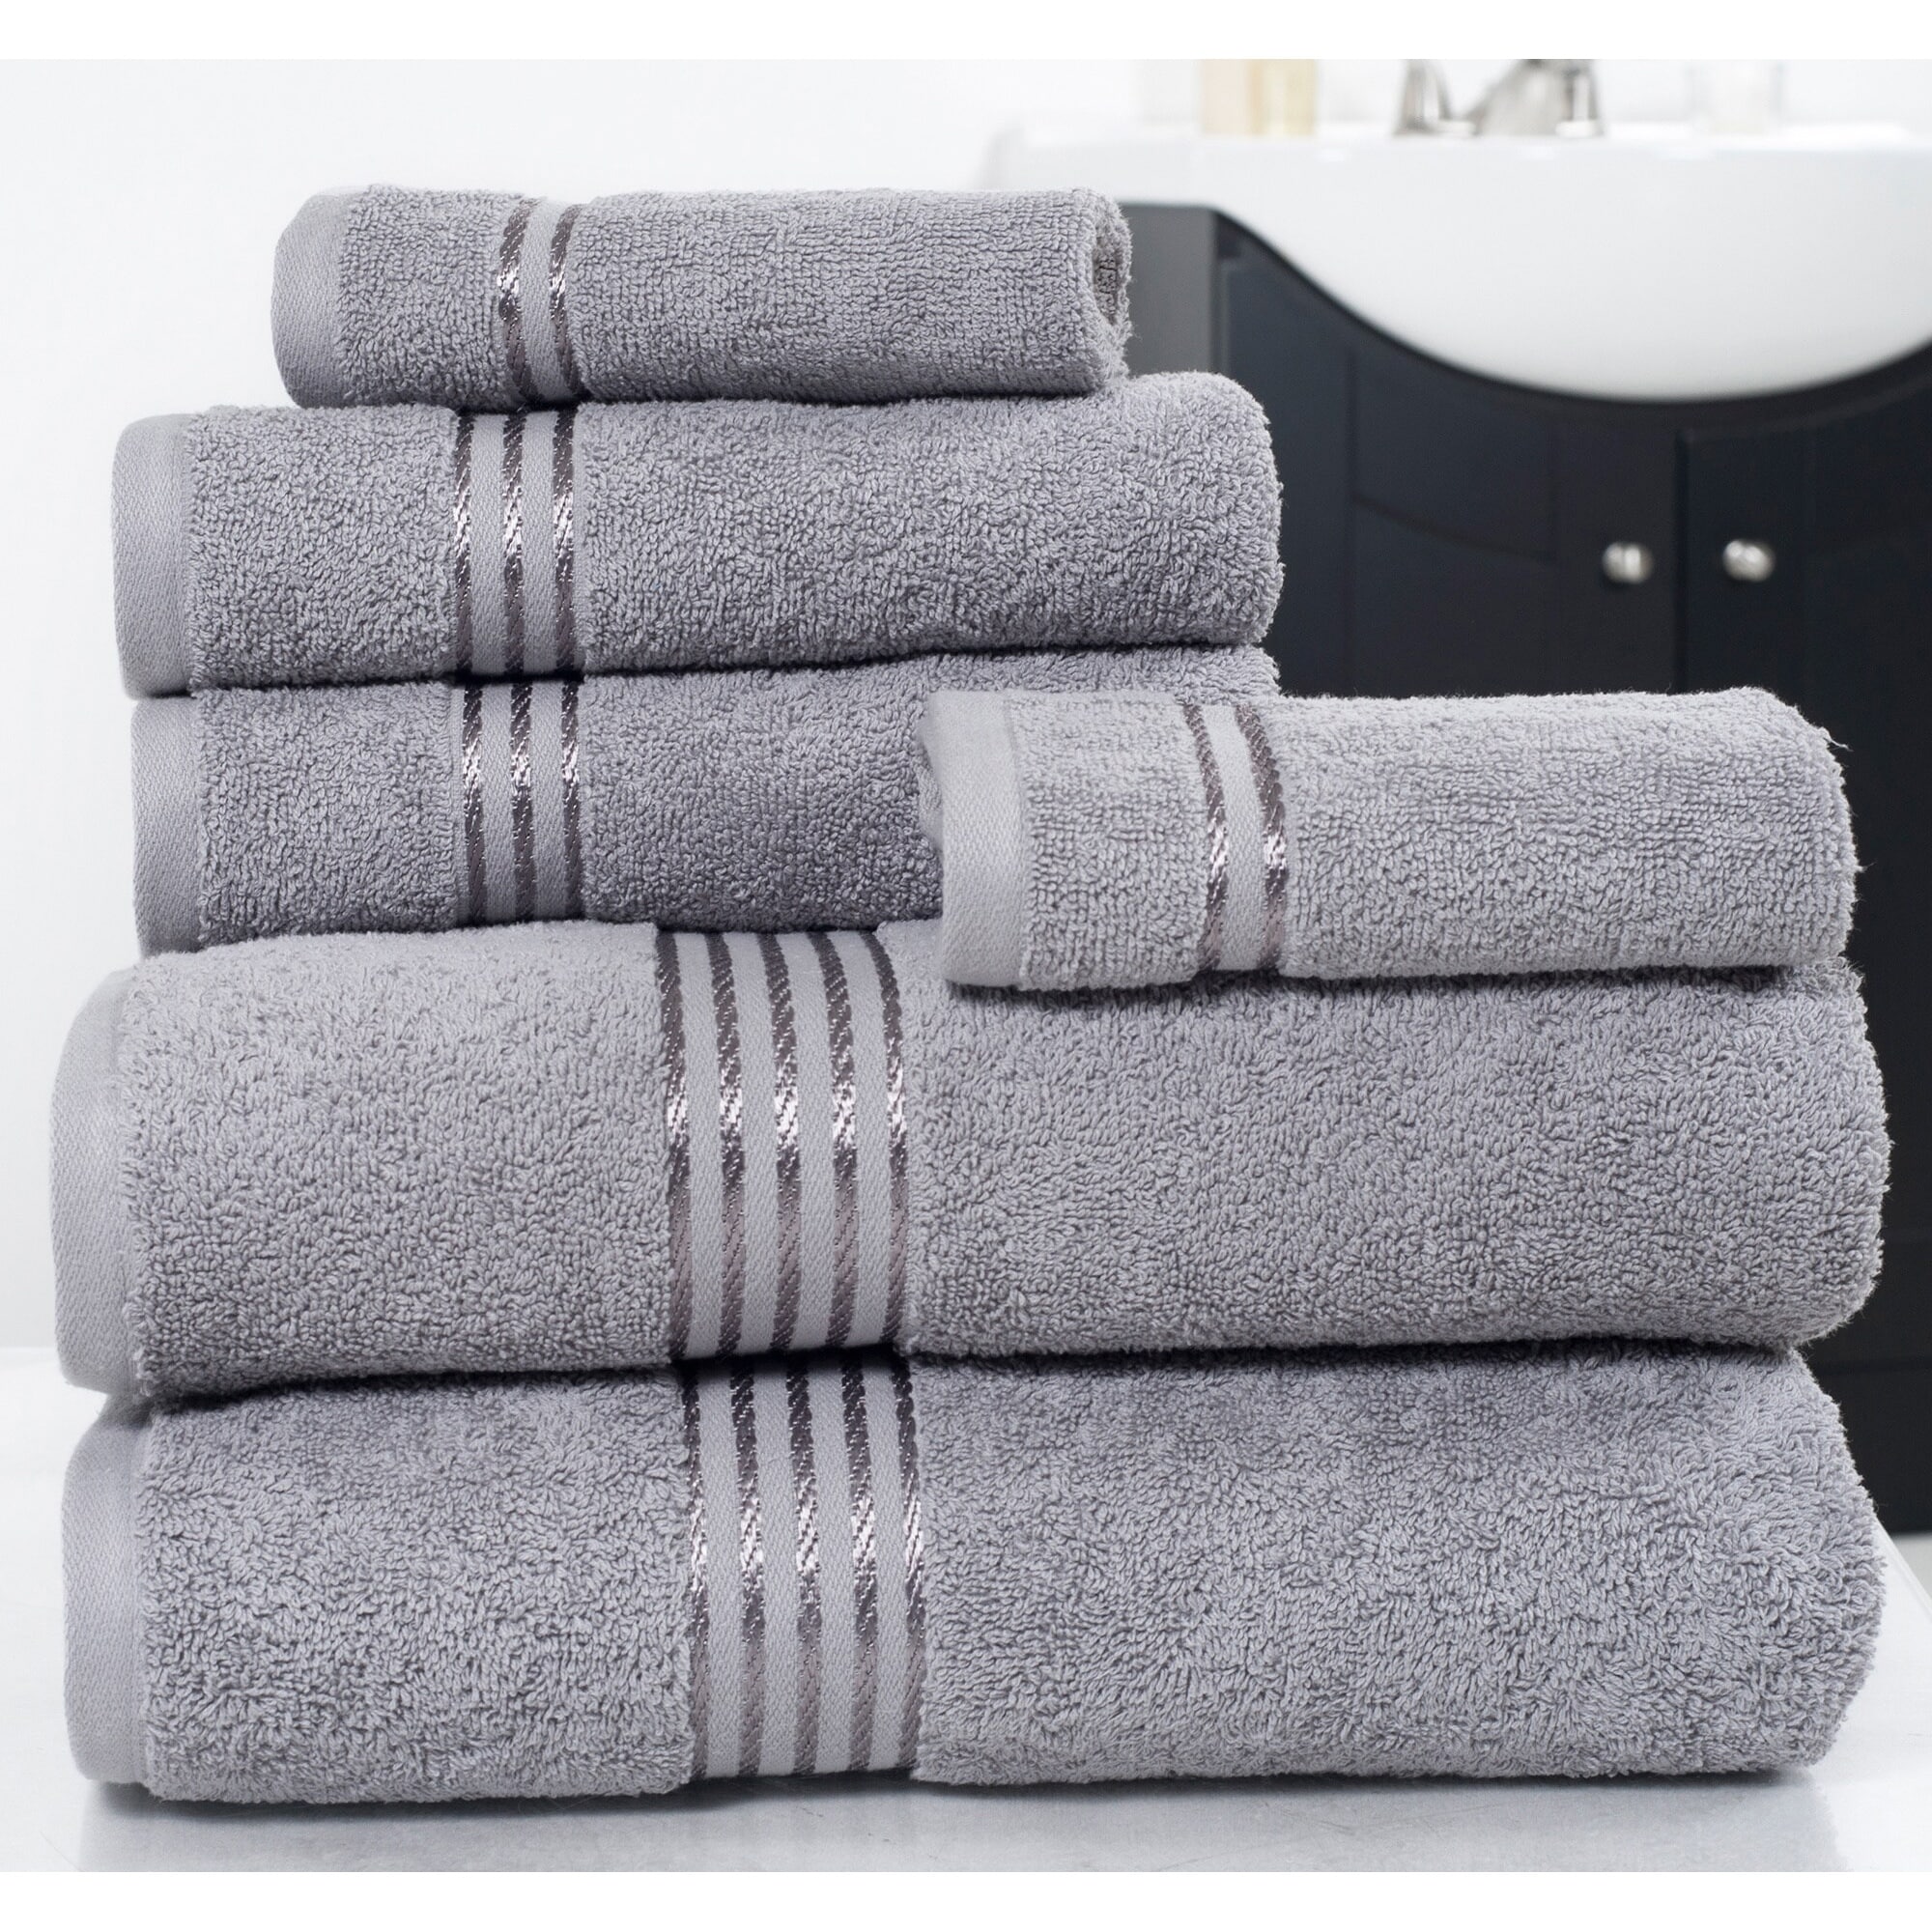 https://ak1.ostkcdn.com/images/products/is/images/direct/447706d8ee57a74a17cb01245f64fd68f95e6317/Windsor-Home-100-percent-Cotton-Hotel-6-piece-Towel-Set.jpg